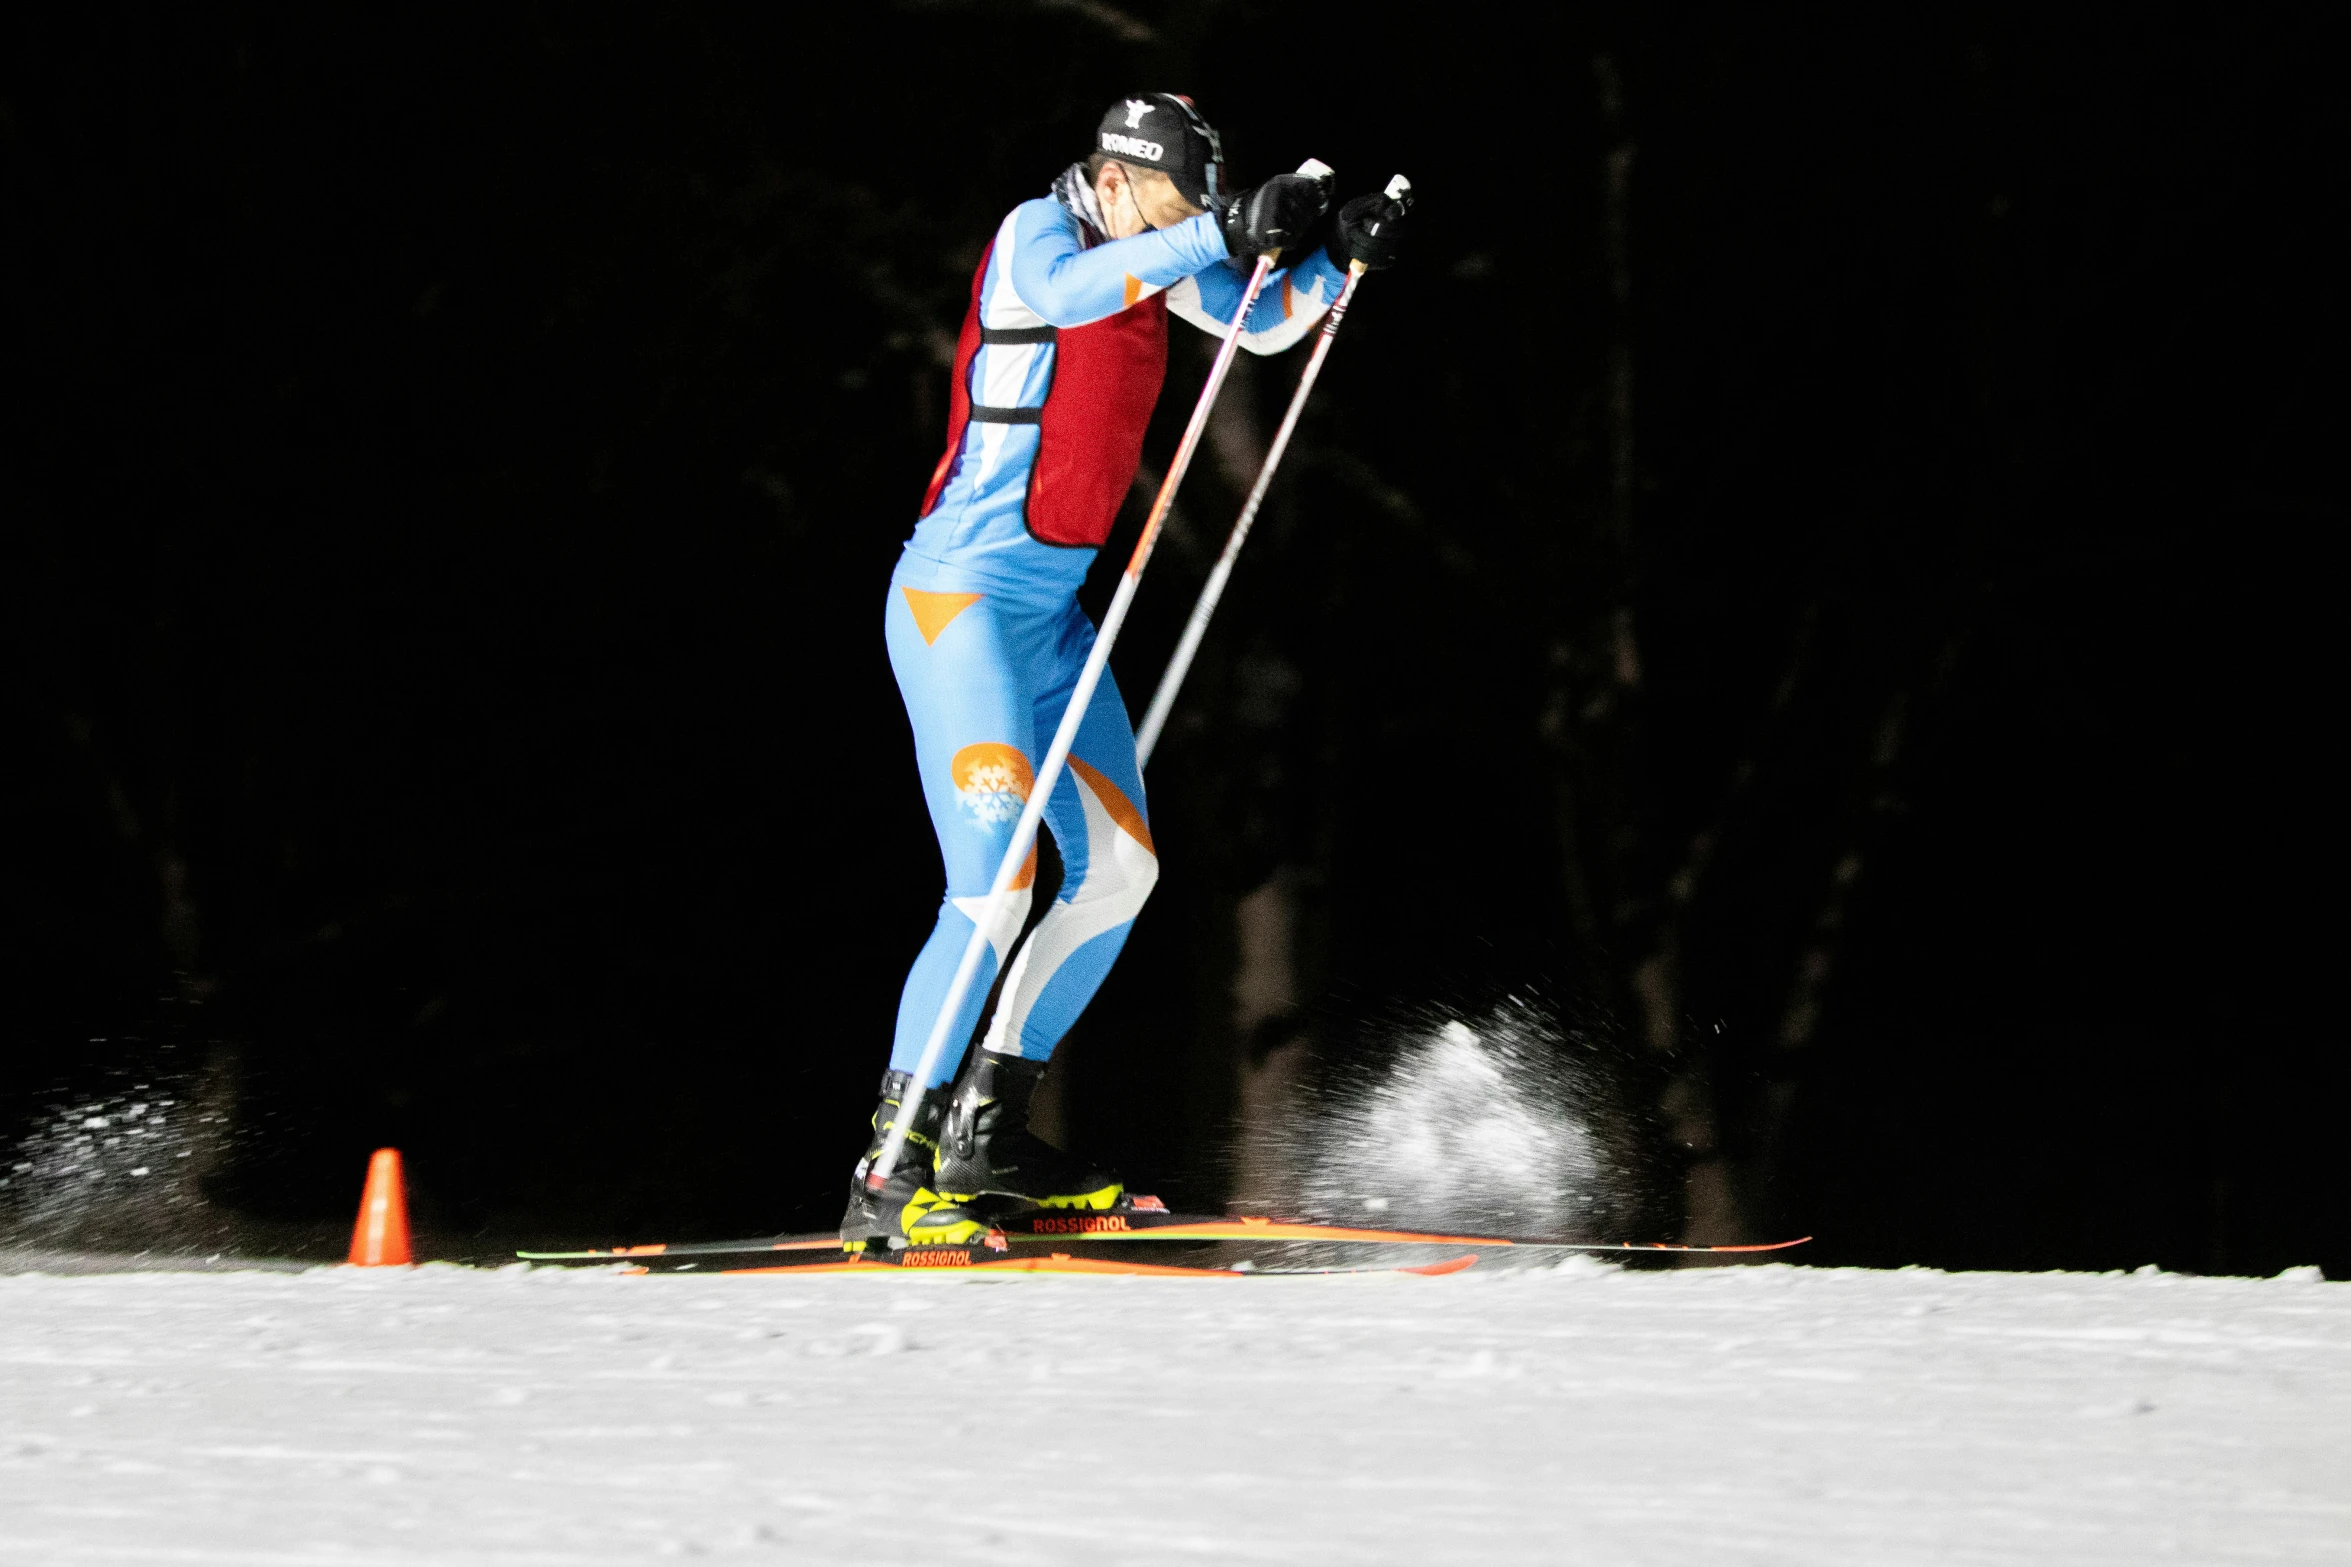 the skier is wearing colorful clothing and holding ski poles